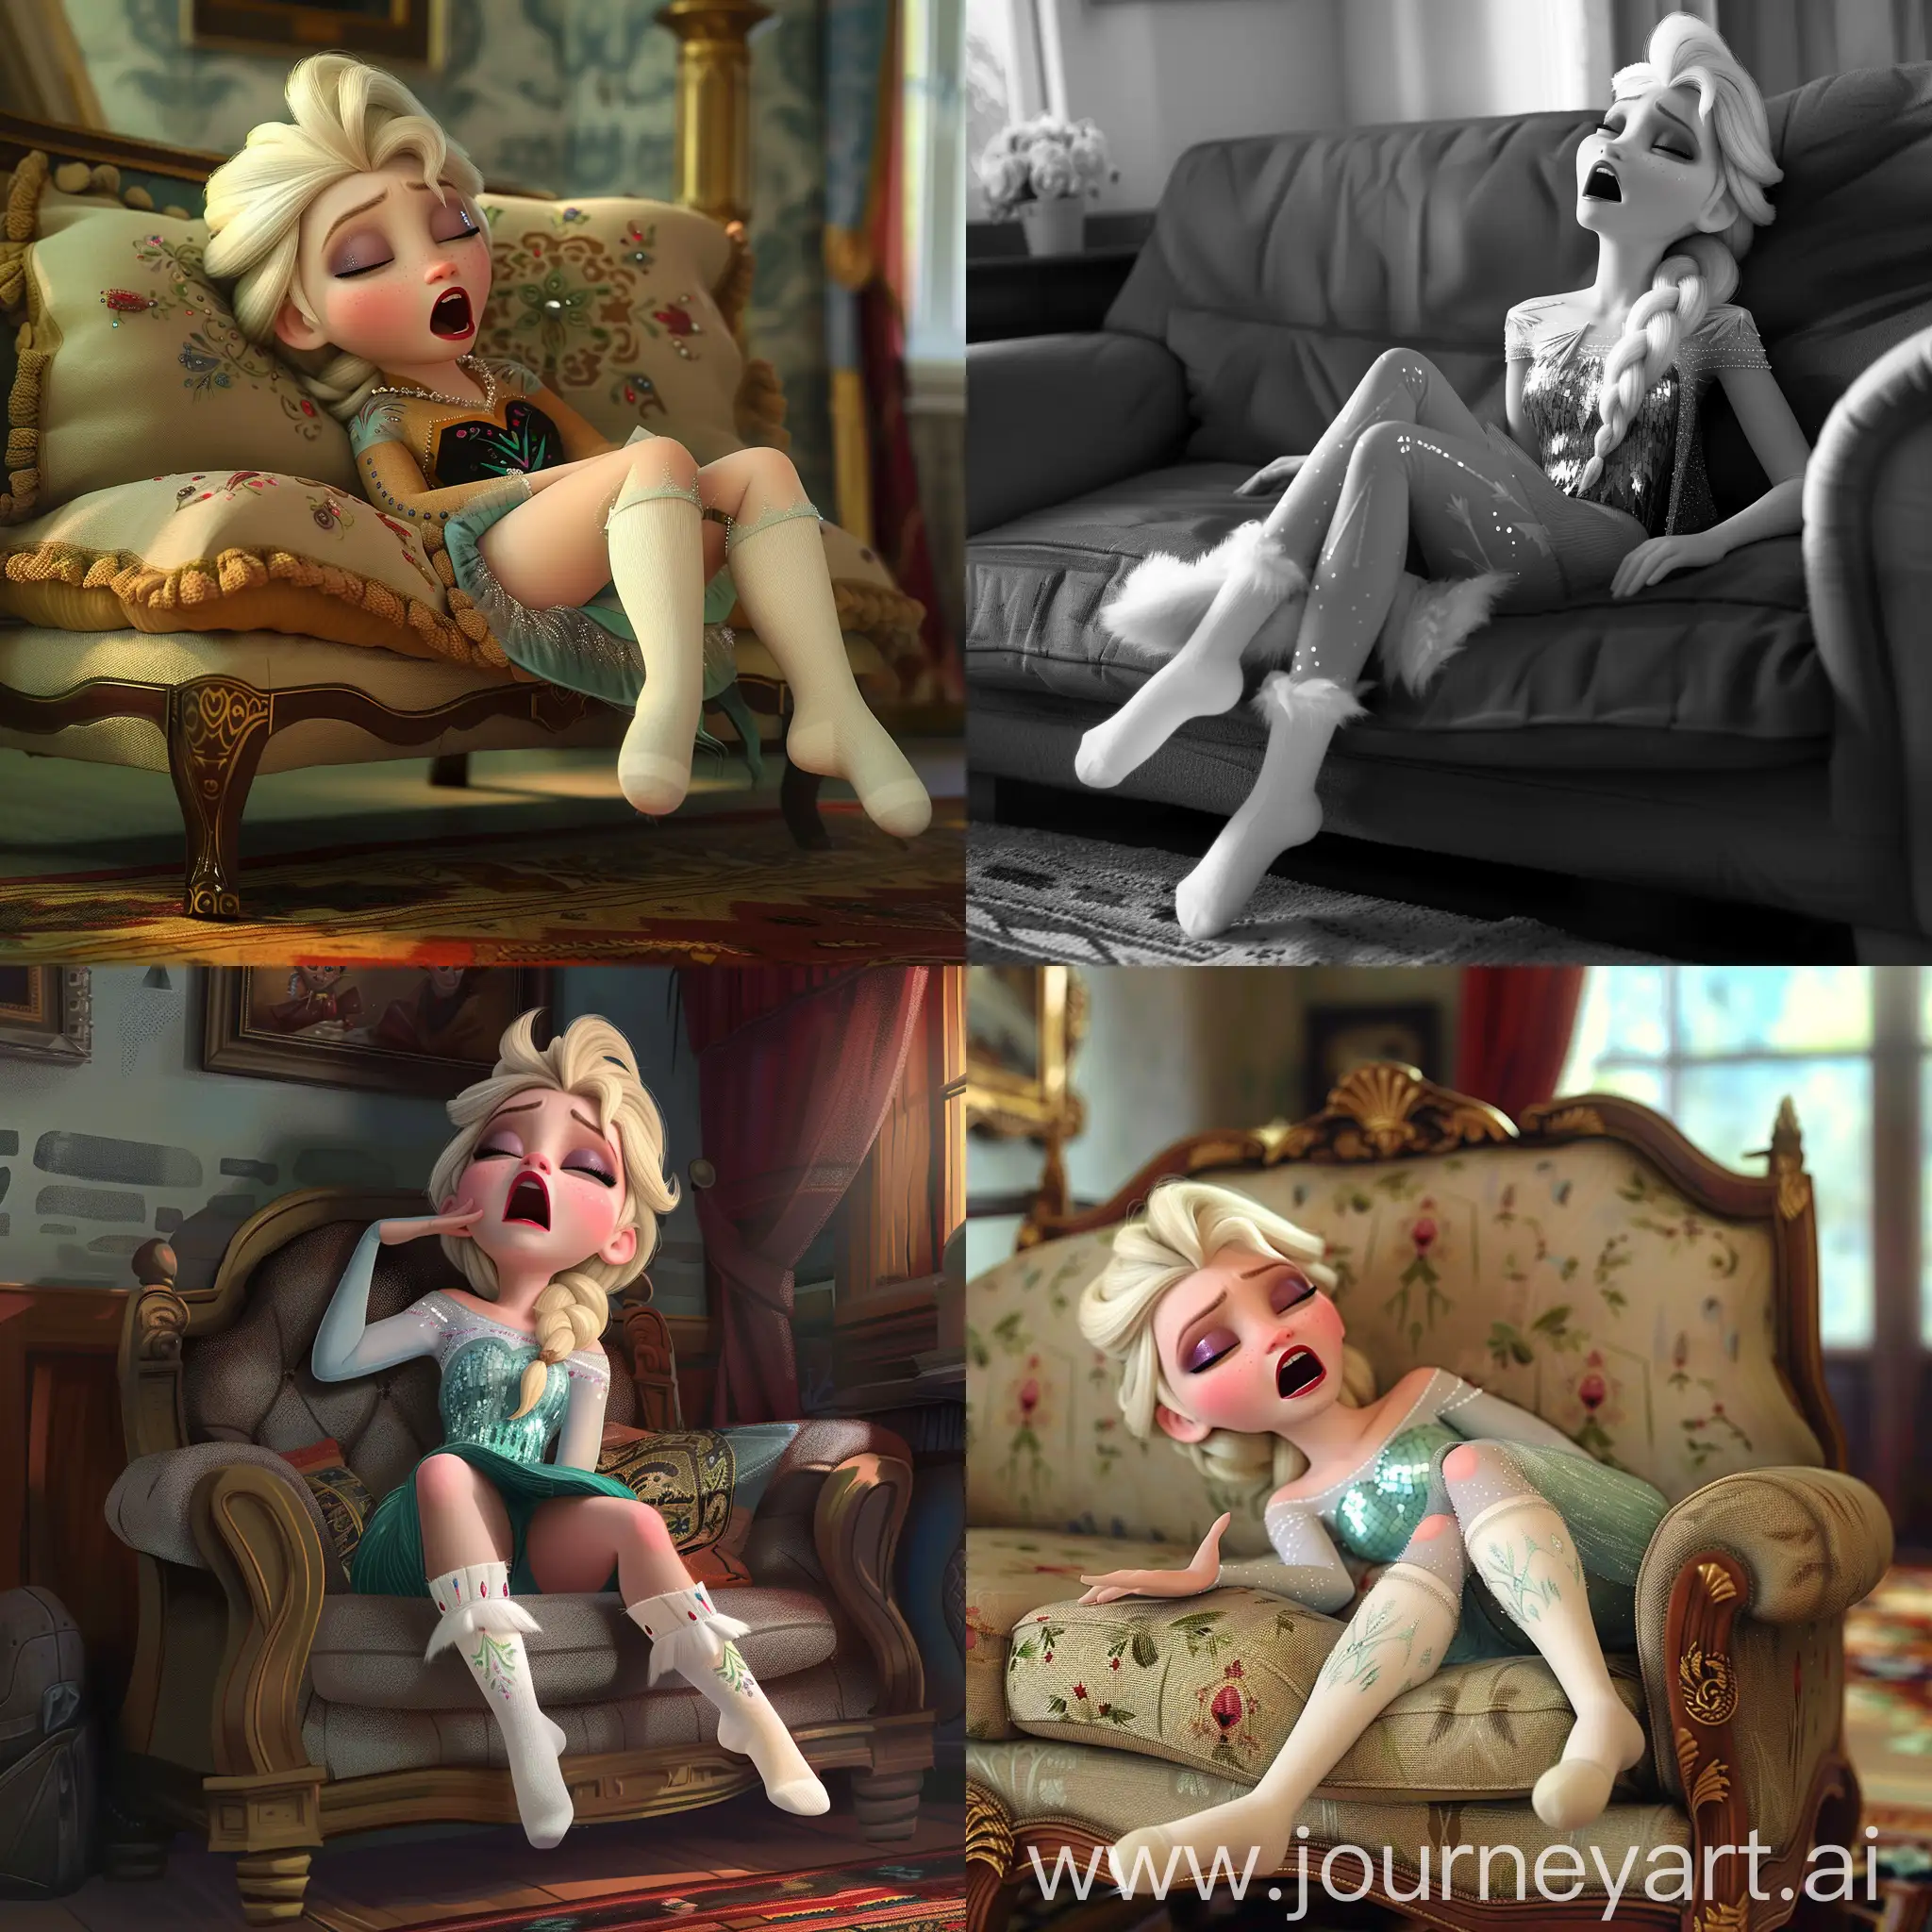 Elsa frozen, sit on her sofa, sleeping with mouth open, wearing short white socks